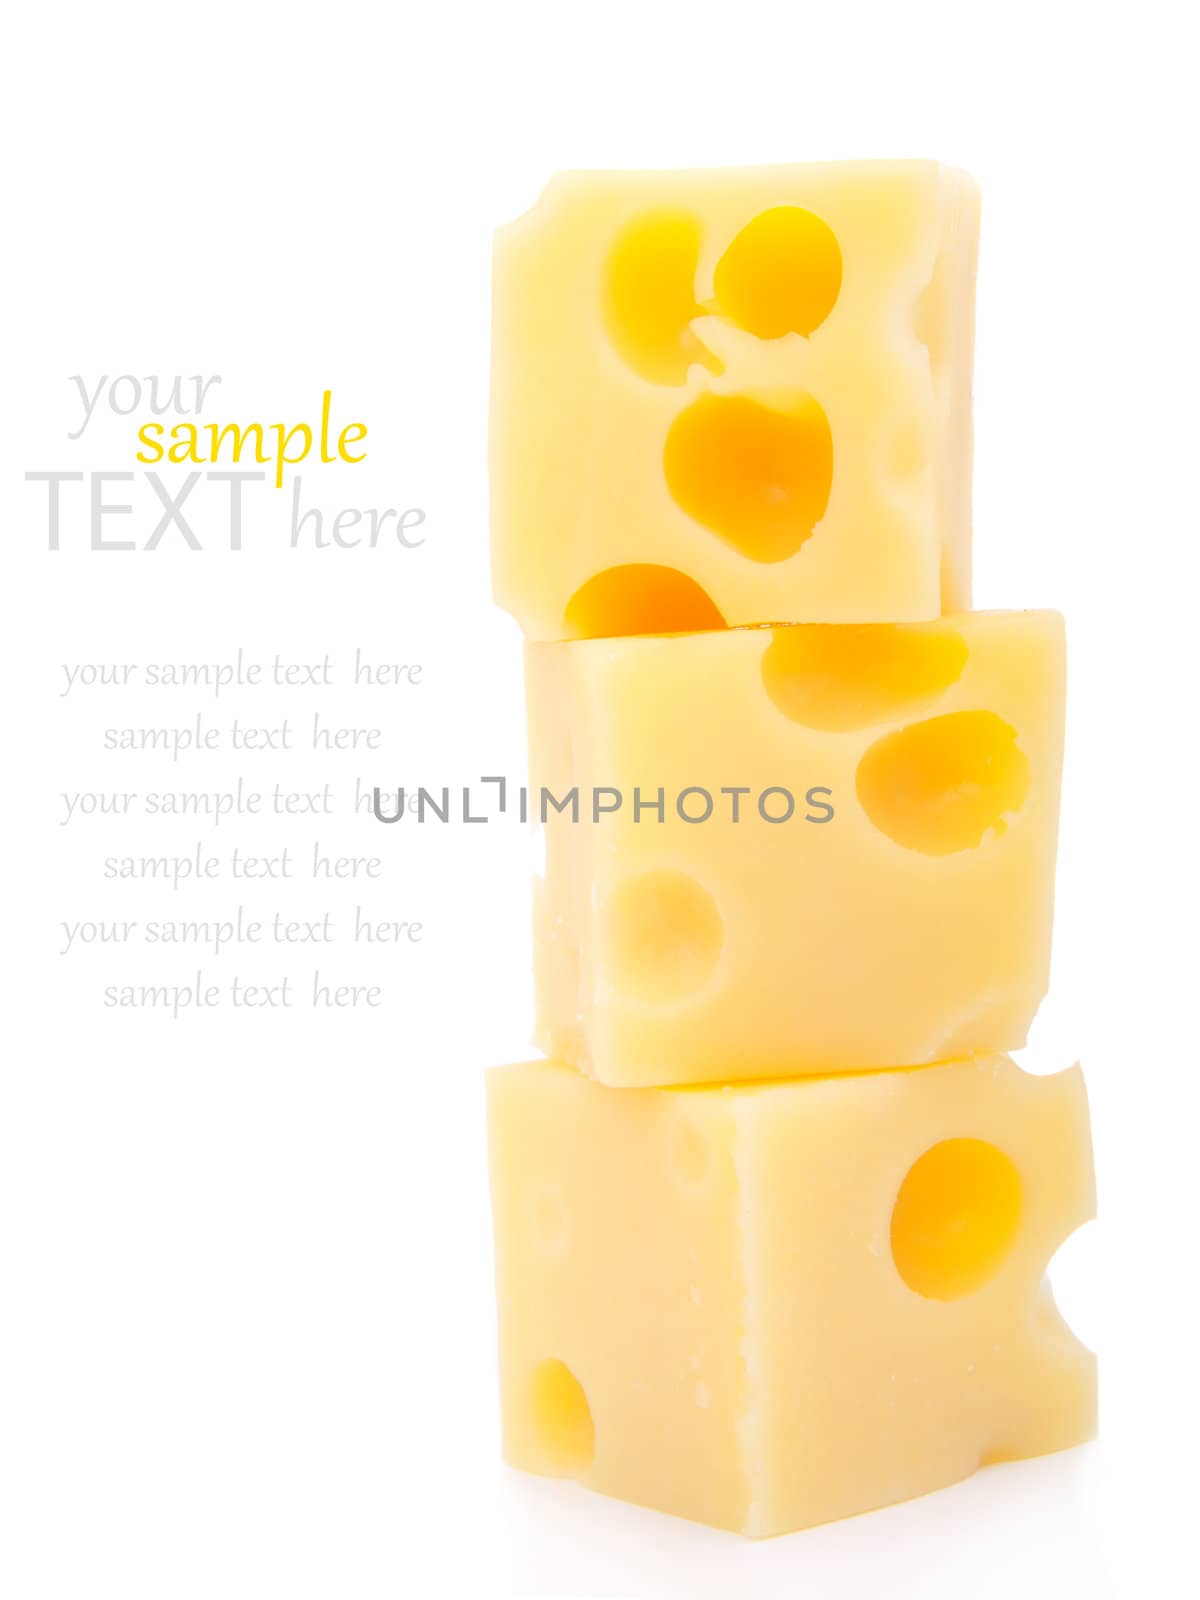 canape made from cheese, on the white background by motorolka